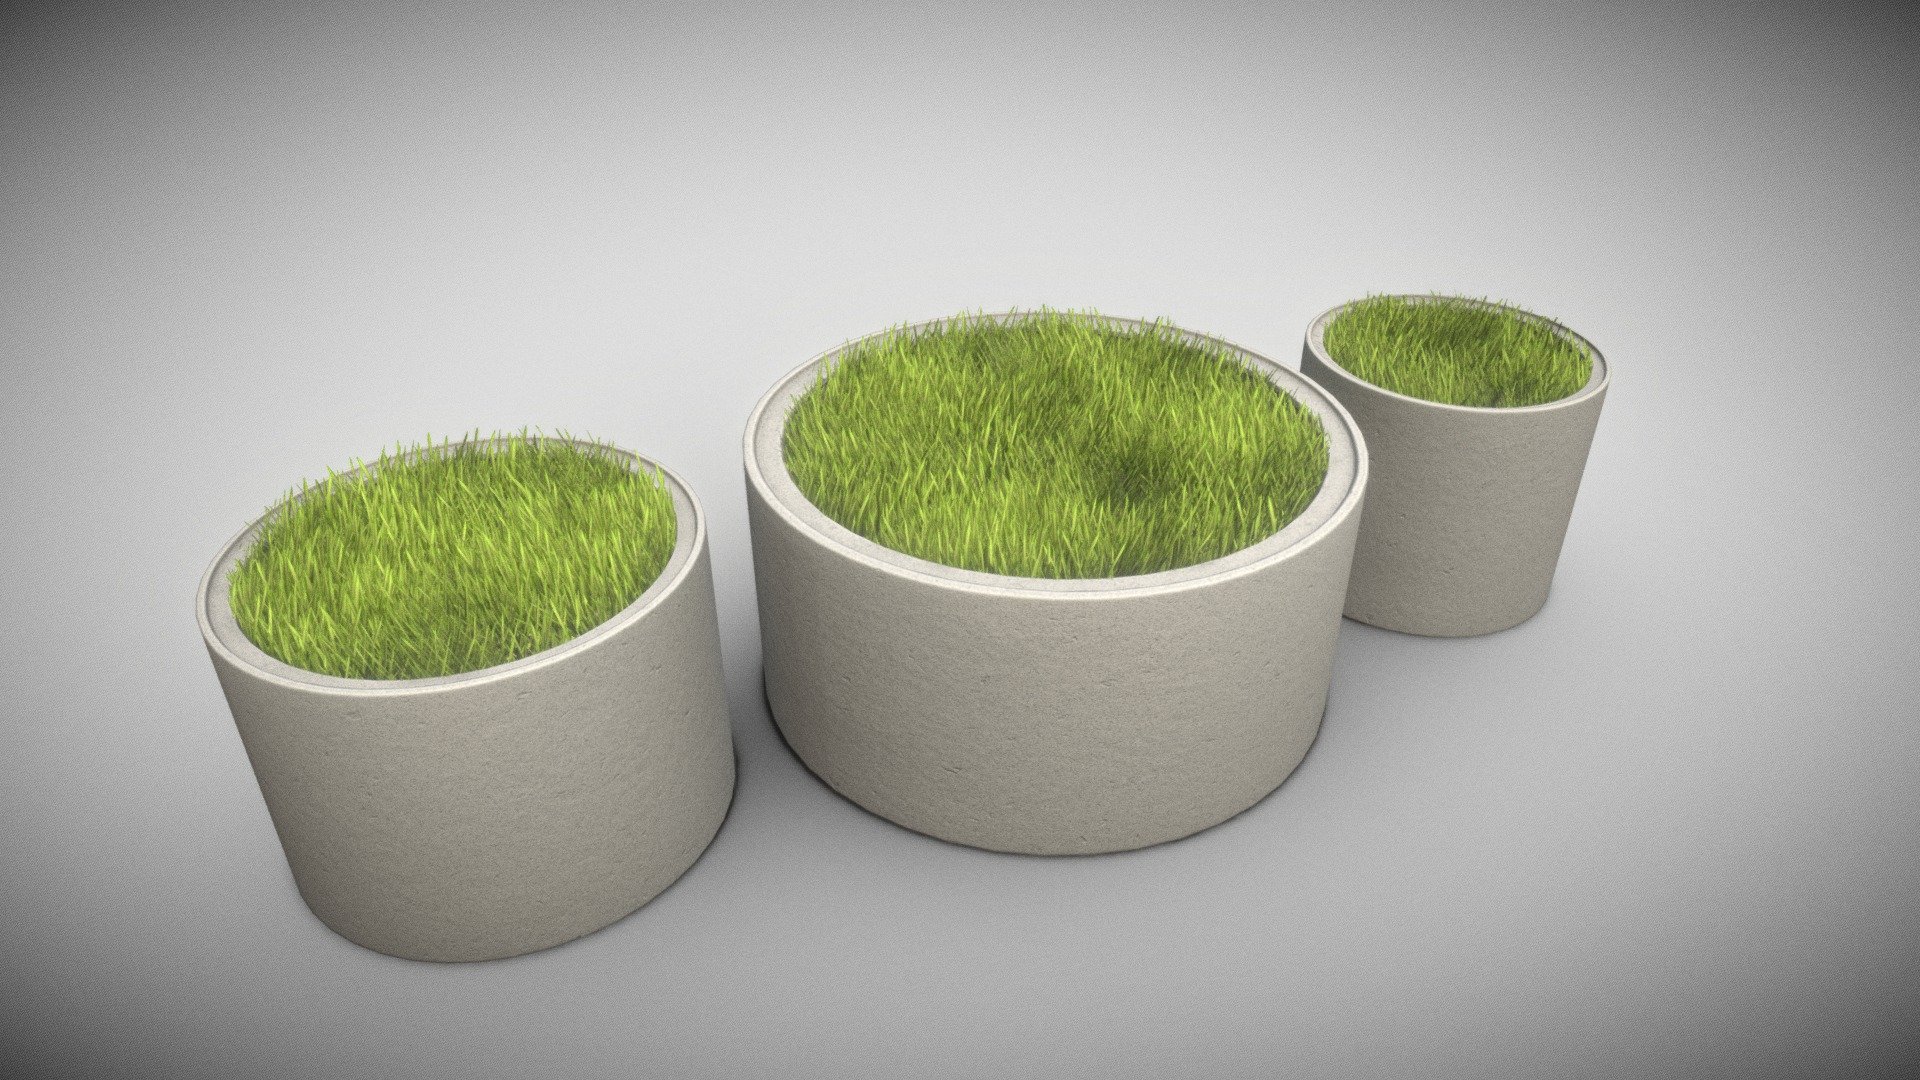 Here are three low-poly concrete pipe pots with grass.


Parts:



Object Name - Concrete_pot_800mm_Grass 


Object Dimensions -  0.799m x 0.799m x 0.763m




Vertices = 1969



Edges = 3459

Polygons = 1744






Object Name - Concrete_pot_1000mm_Grass 


Object Dimensions -  1.001m x 1.001m x 0.786m




Vertices = 2063



Edges = 3541

Polygons = 1760






Object Name - Concrete_pot_1500mm_Grass 


Object Dimensions -  1.500m x 1.500m x 0.812m




Vertices = 2675



Edges = 3623

Polygons = 1403



3D model formats: 




Native format (*.blend)

Autodesk FBX (.fbx)

OBJ (.obj, .mtl)

glTF (.gltf, .glb)

X3D (.x3d)

Collada (.dae)

Stereolithography (.stl)

Polygon File Format (.ply)

Alembic (.abc)

DXF (.dxf)

USDC 



Modeled and textured by 3DHaupt in Blender-2.91 - Concrete Pipe Pots with Grass - Buy Royalty Free 3D model by VIS-All-3D (@VIS-All) 3d model